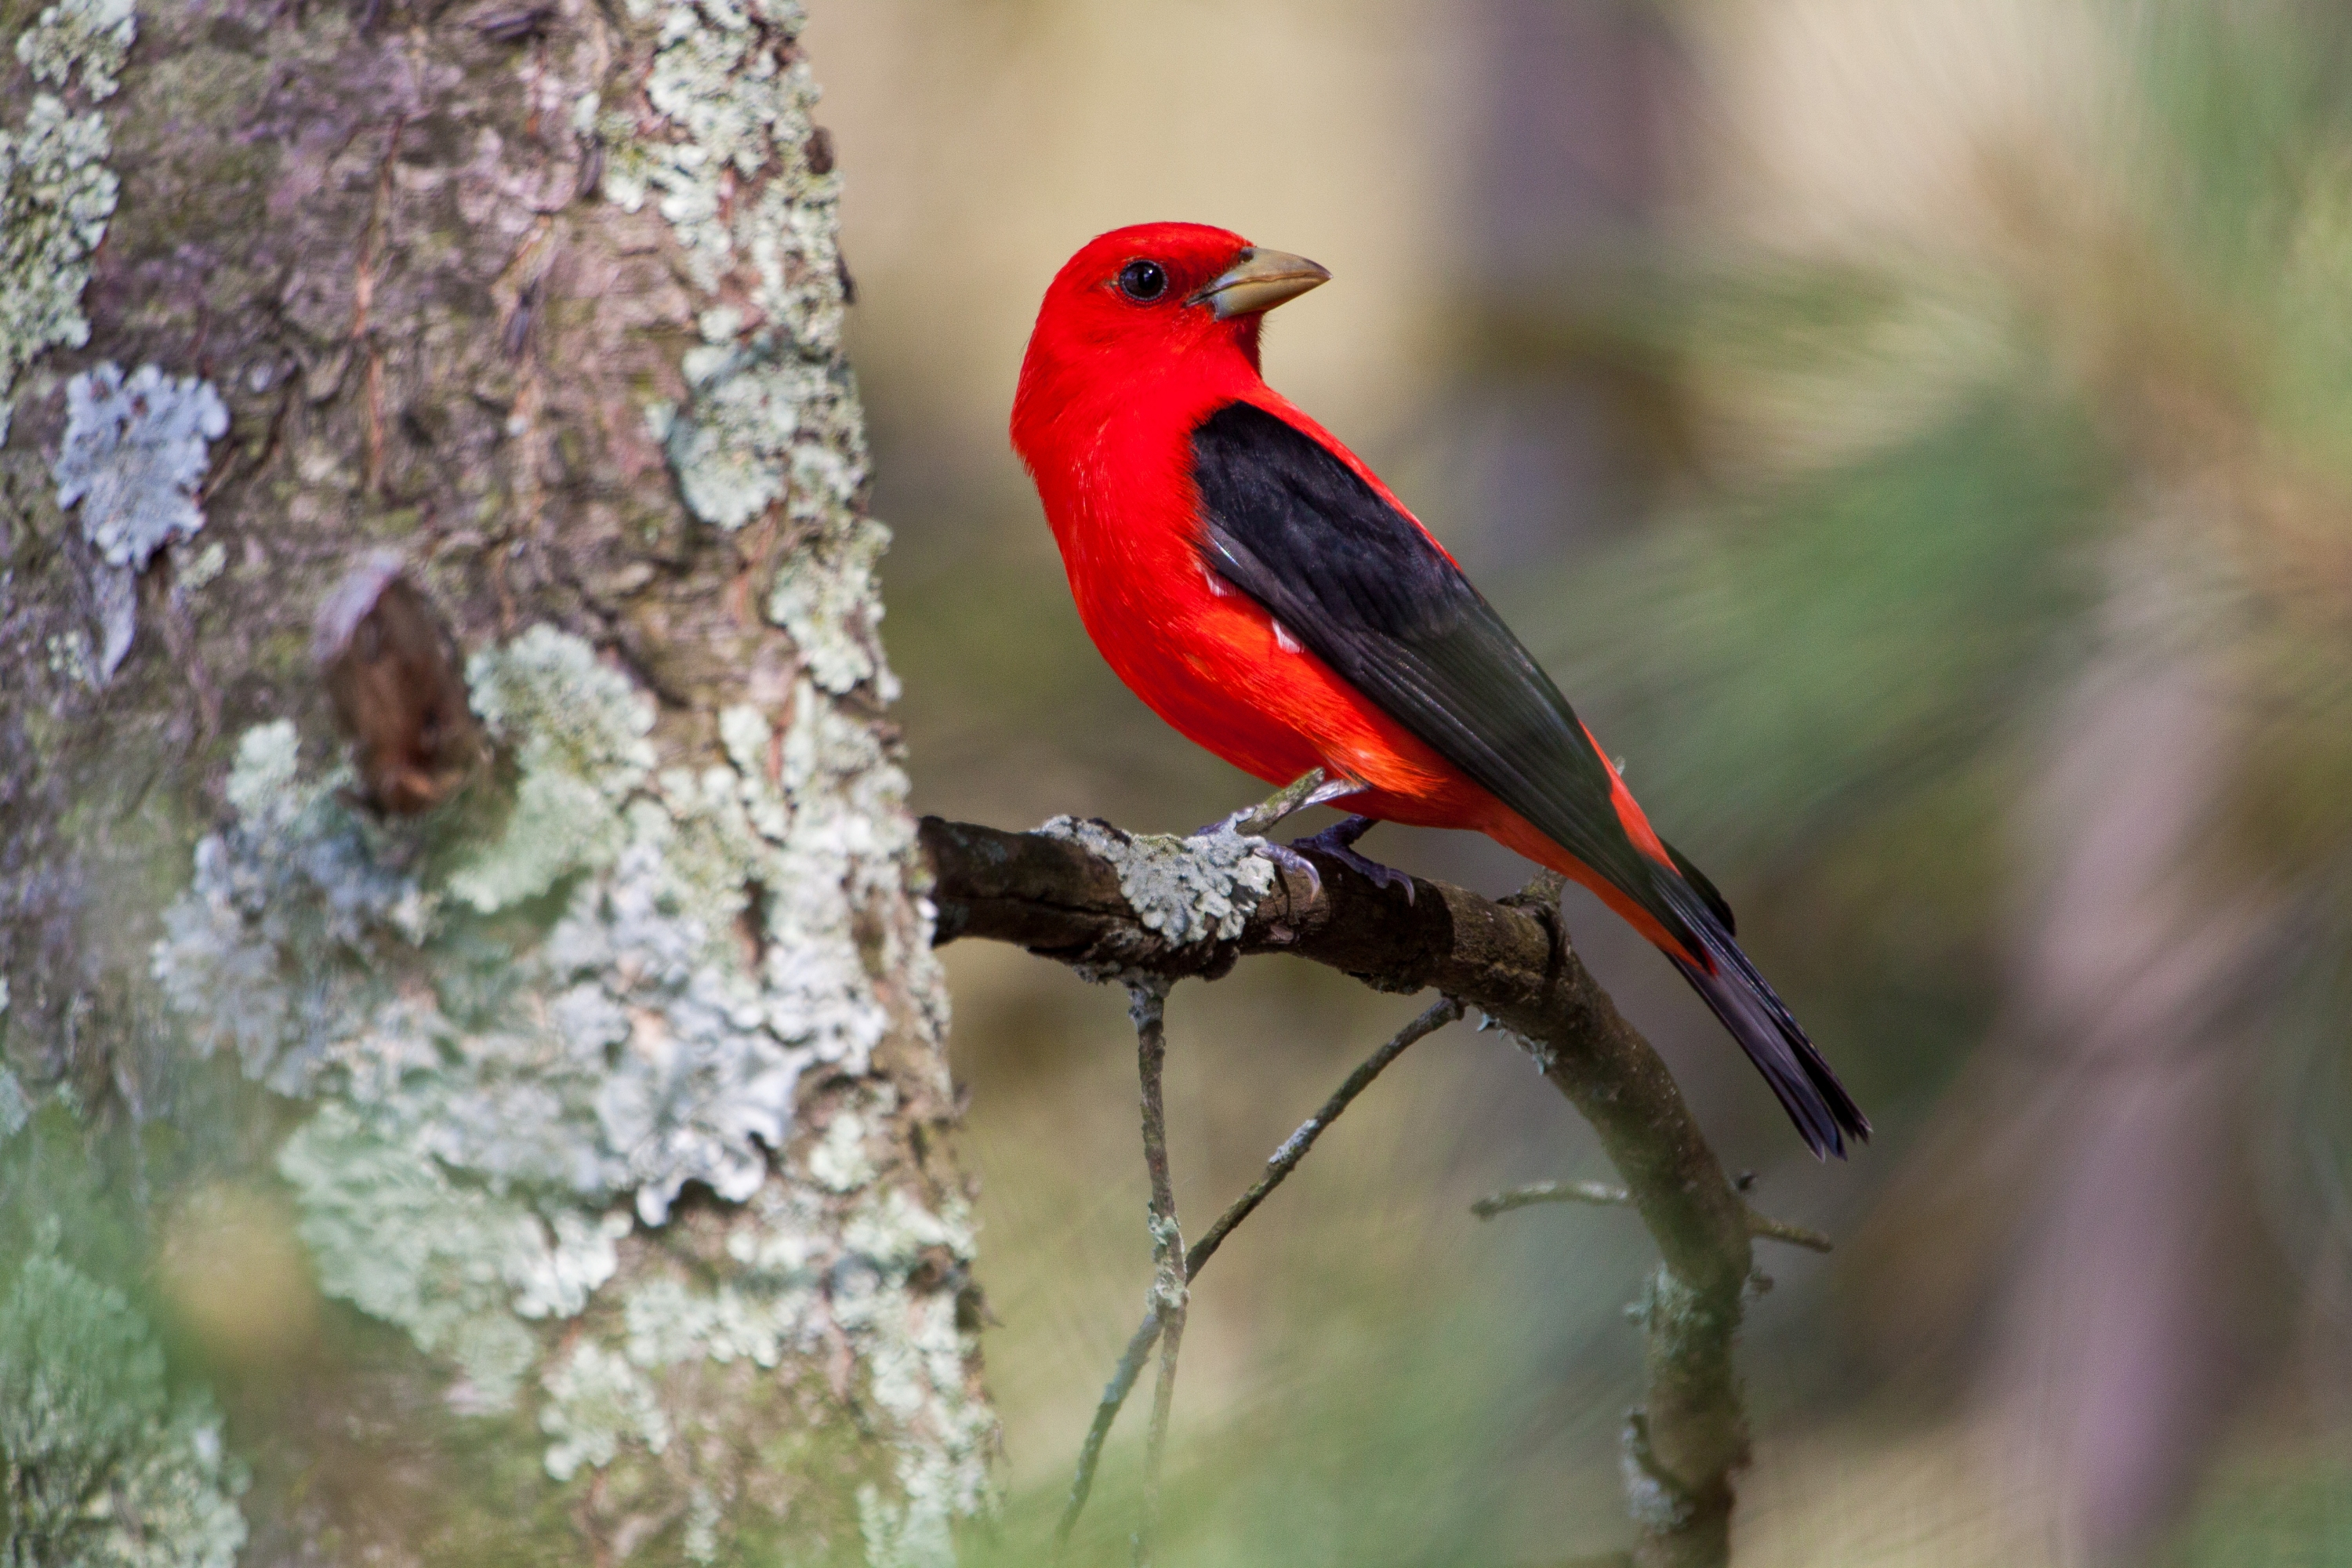 A red bird with black wings rests on a tree branch.